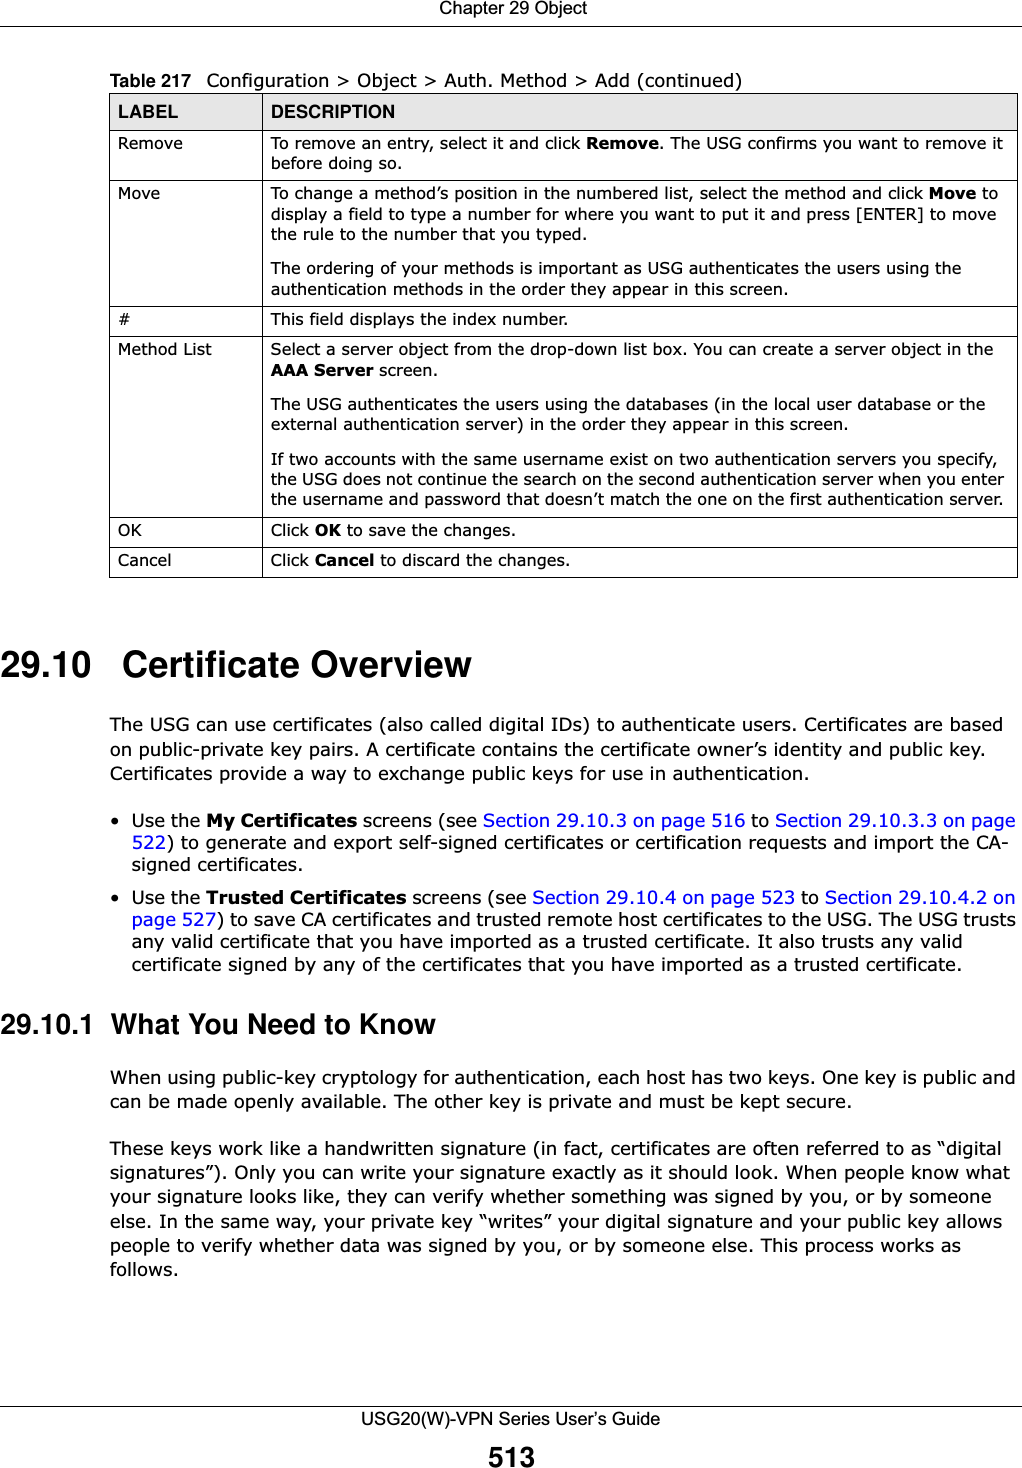  Chapter 29 ObjectUSG20(W)-VPN Series User’s Guide51329.10   Certificate OverviewThe USG can use certificates (also called digital IDs) to authenticate users. Certificates are based on public-private key pairs. A certificate contains the certificate owner’s identity and public key. Certificates provide a way to exchange public keys for use in authentication. •Use the My Certificates screens (see Section 29.10.3 on page 516 to Section 29.10.3.3 on page 522) to generate and export self-signed certificates or certification requests and import the CA-signed certificates.•Use the Trusted Certificates screens (see Section 29.10.4 on page 523 to Section 29.10.4.2 on page 527) to save CA certificates and trusted remote host certificates to the USG. The USG trusts any valid certificate that you have imported as a trusted certificate. It also trusts any valid certificate signed by any of the certificates that you have imported as a trusted certificate. 29.10.1  What You Need to KnowWhen using public-key cryptology for authentication, each host has two keys. One key is public and can be made openly available. The other key is private and must be kept secure. These keys work like a handwritten signature (in fact, certificates are often referred to as “digital signatures”). Only you can write your signature exactly as it should look. When people know what your signature looks like, they can verify whether something was signed by you, or by someone else. In the same way, your private key “writes” your digital signature and your public key allows people to verify whether data was signed by you, or by someone else. This process works as follows.Remove To remove an entry, select it and click Remove. The USG confirms you want to remove it before doing so.Move To change a method’s position in the numbered list, select the method and click Move to display a field to type a number for where you want to put it and press [ENTER] to move the rule to the number that you typed.The ordering of your methods is important as USG authenticates the users using the authentication methods in the order they appear in this screen.# This field displays the index number.Method List Select a server object from the drop-down list box. You can create a server object in the AAA Server screen.   The USG authenticates the users using the databases (in the local user database or the external authentication server) in the order they appear in this screen. If two accounts with the same username exist on two authentication servers you specify, the USG does not continue the search on the second authentication server when you enter the username and password that doesn’t match the one on the first authentication server. OK Click OK to save the changes. Cancel Click Cancel to discard the changes. Table 217   Configuration &gt; Object &gt; Auth. Method &gt; Add (continued)LABEL DESCRIPTION